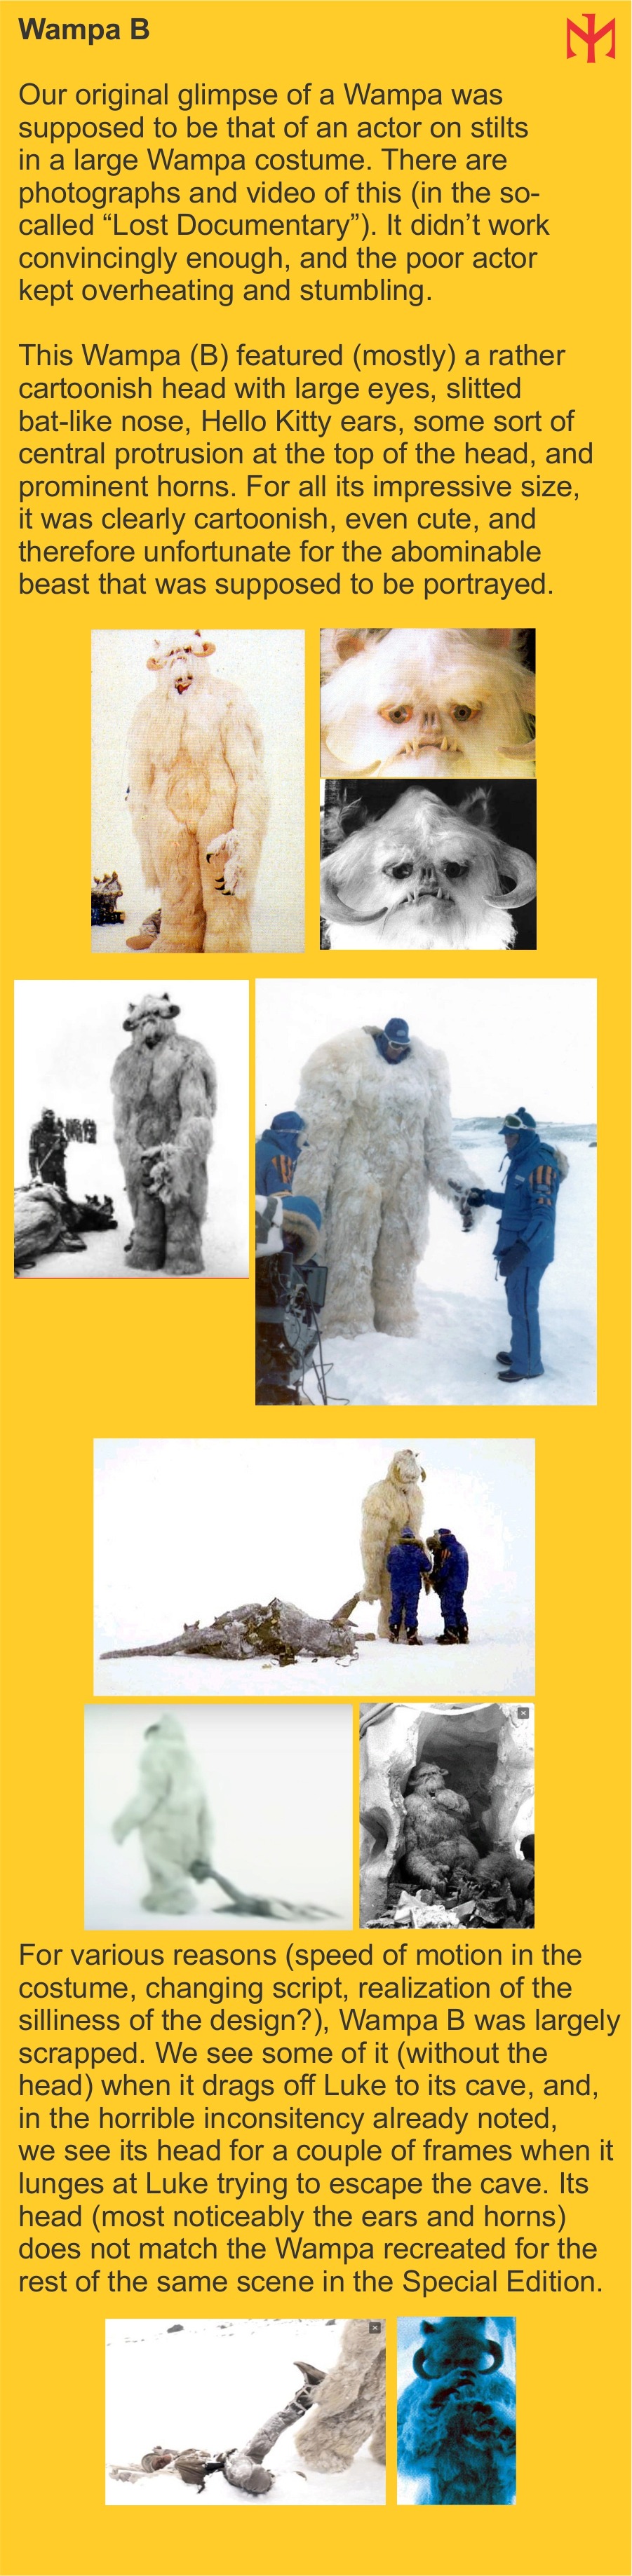 scifi - Tiffany, Tanya, and Willie (Tauntauns and Wampas): Updated Oct 22 2022 - Page 2 Twswc029